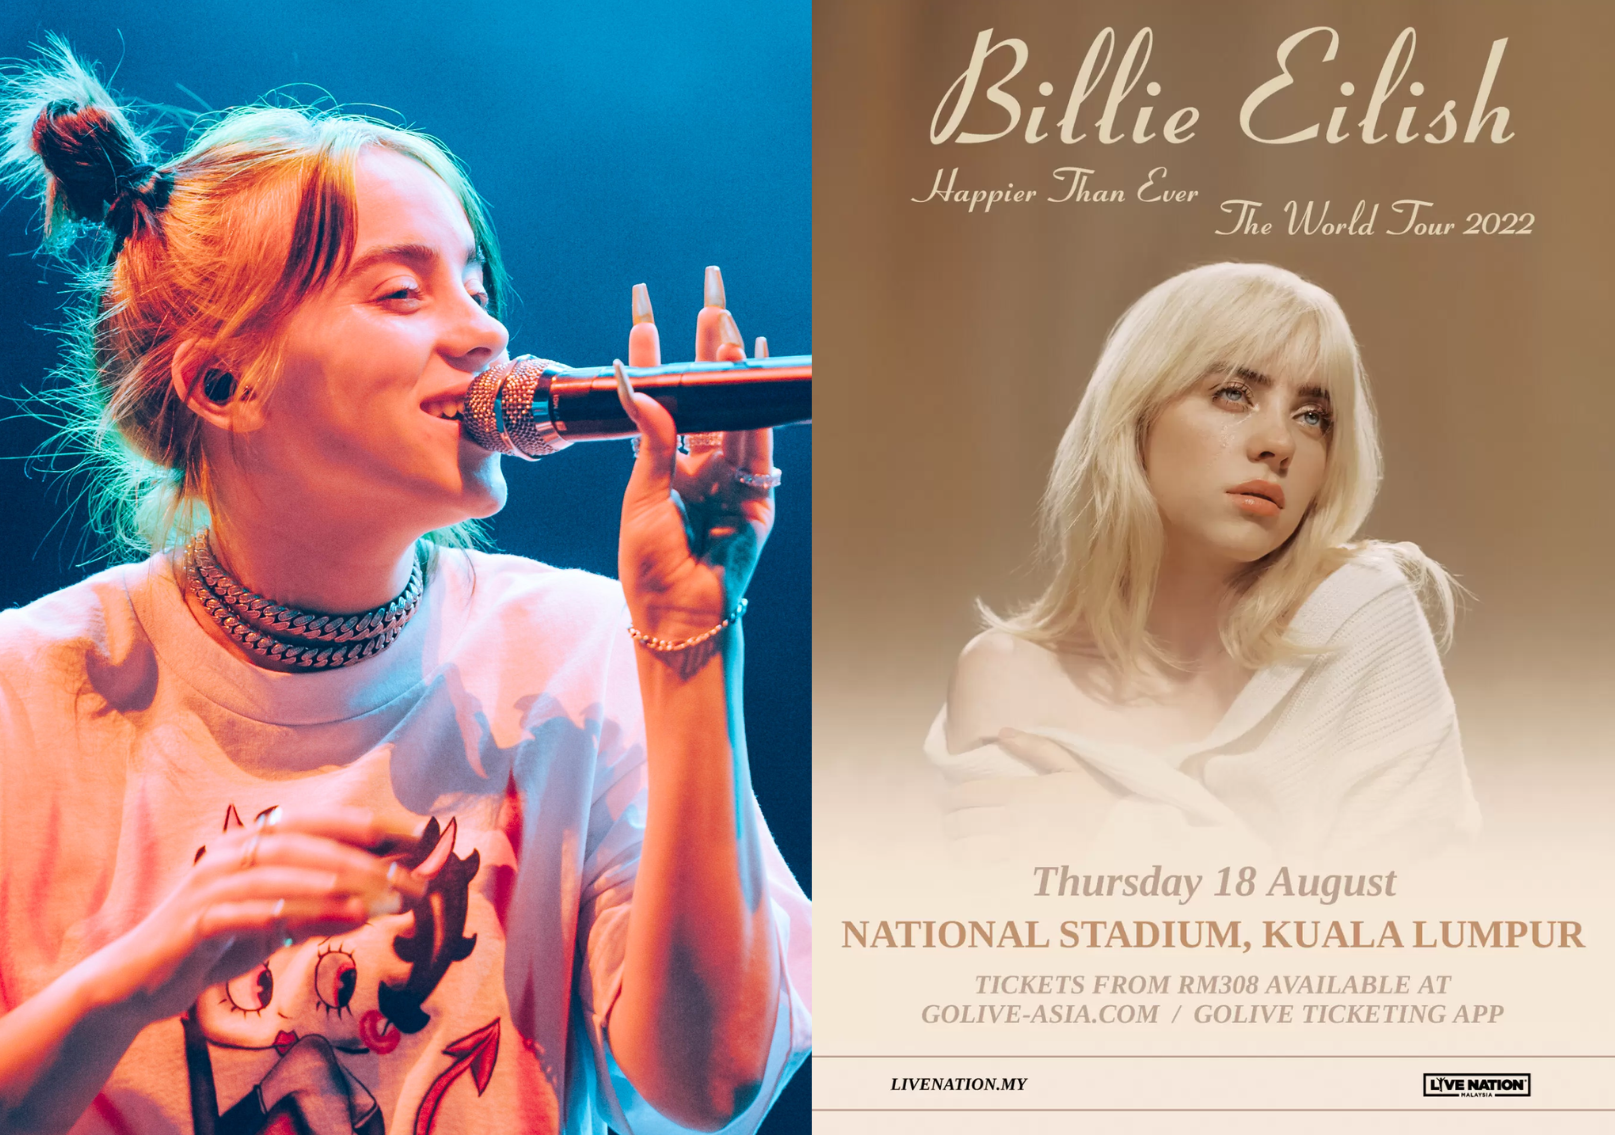 Looks like everyone will be “Happier Than Ever” if they get to see Billie perform live.